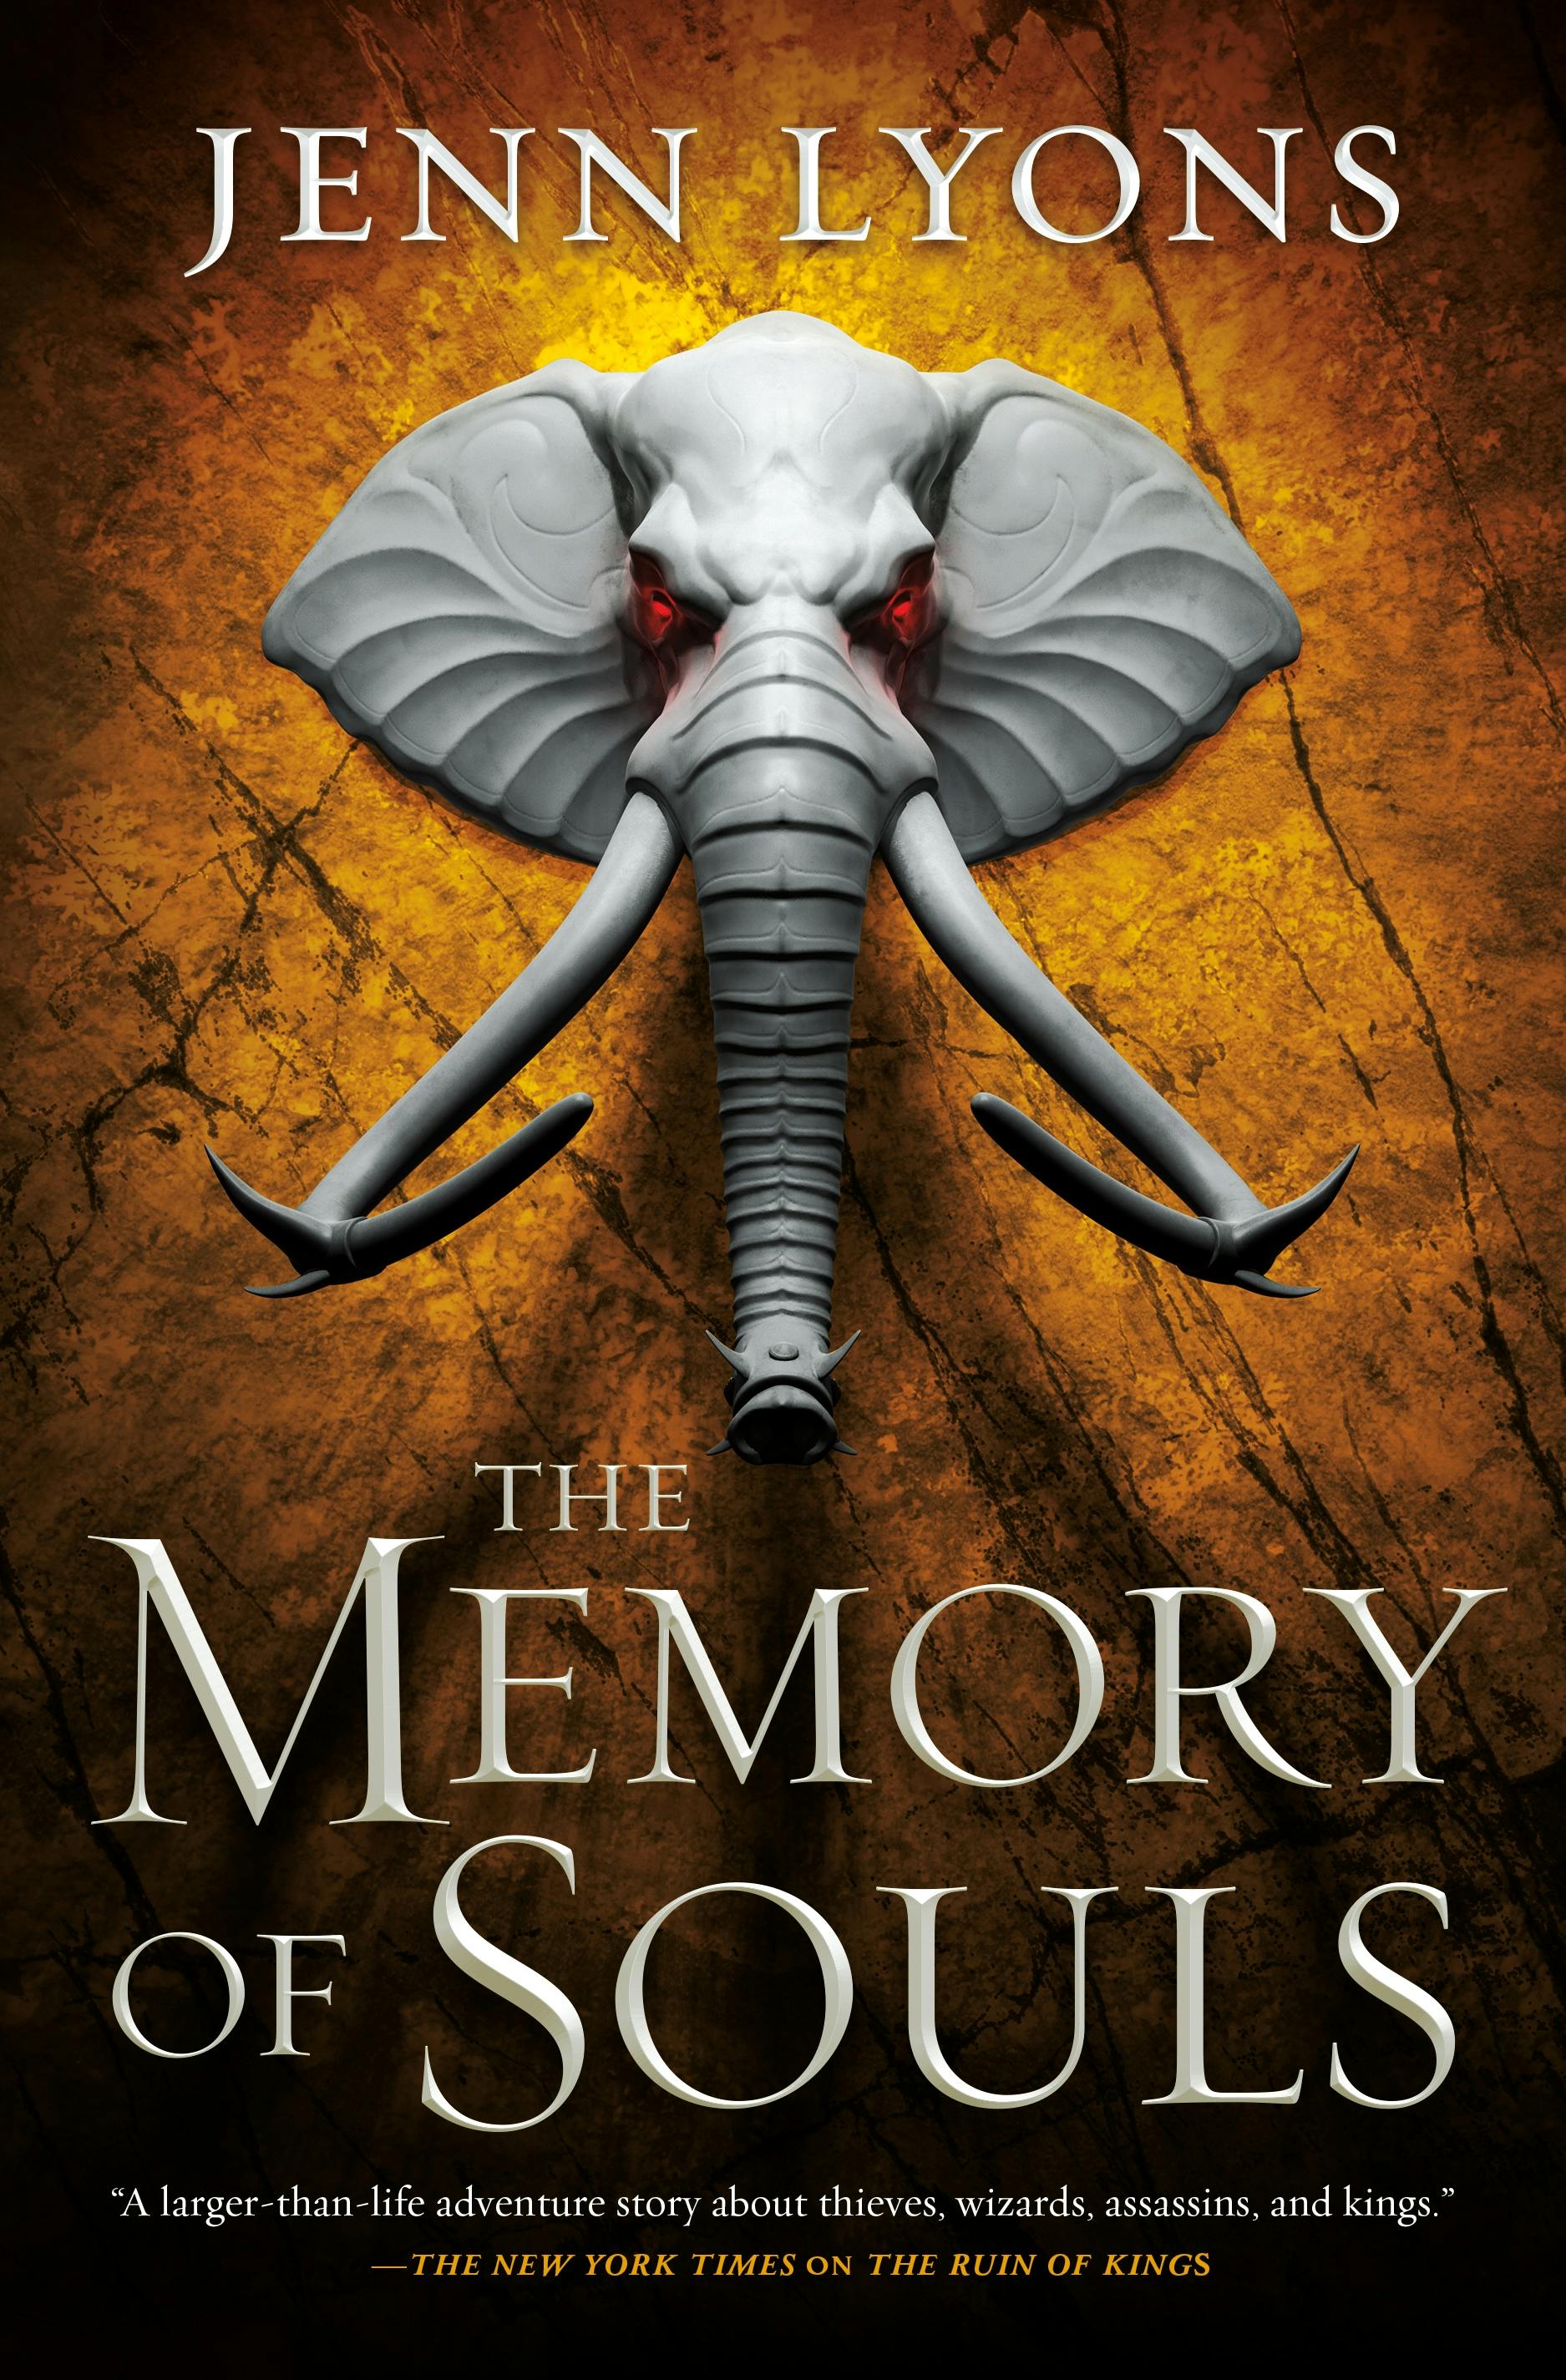 Cover for the book titled as: The Memory of Souls